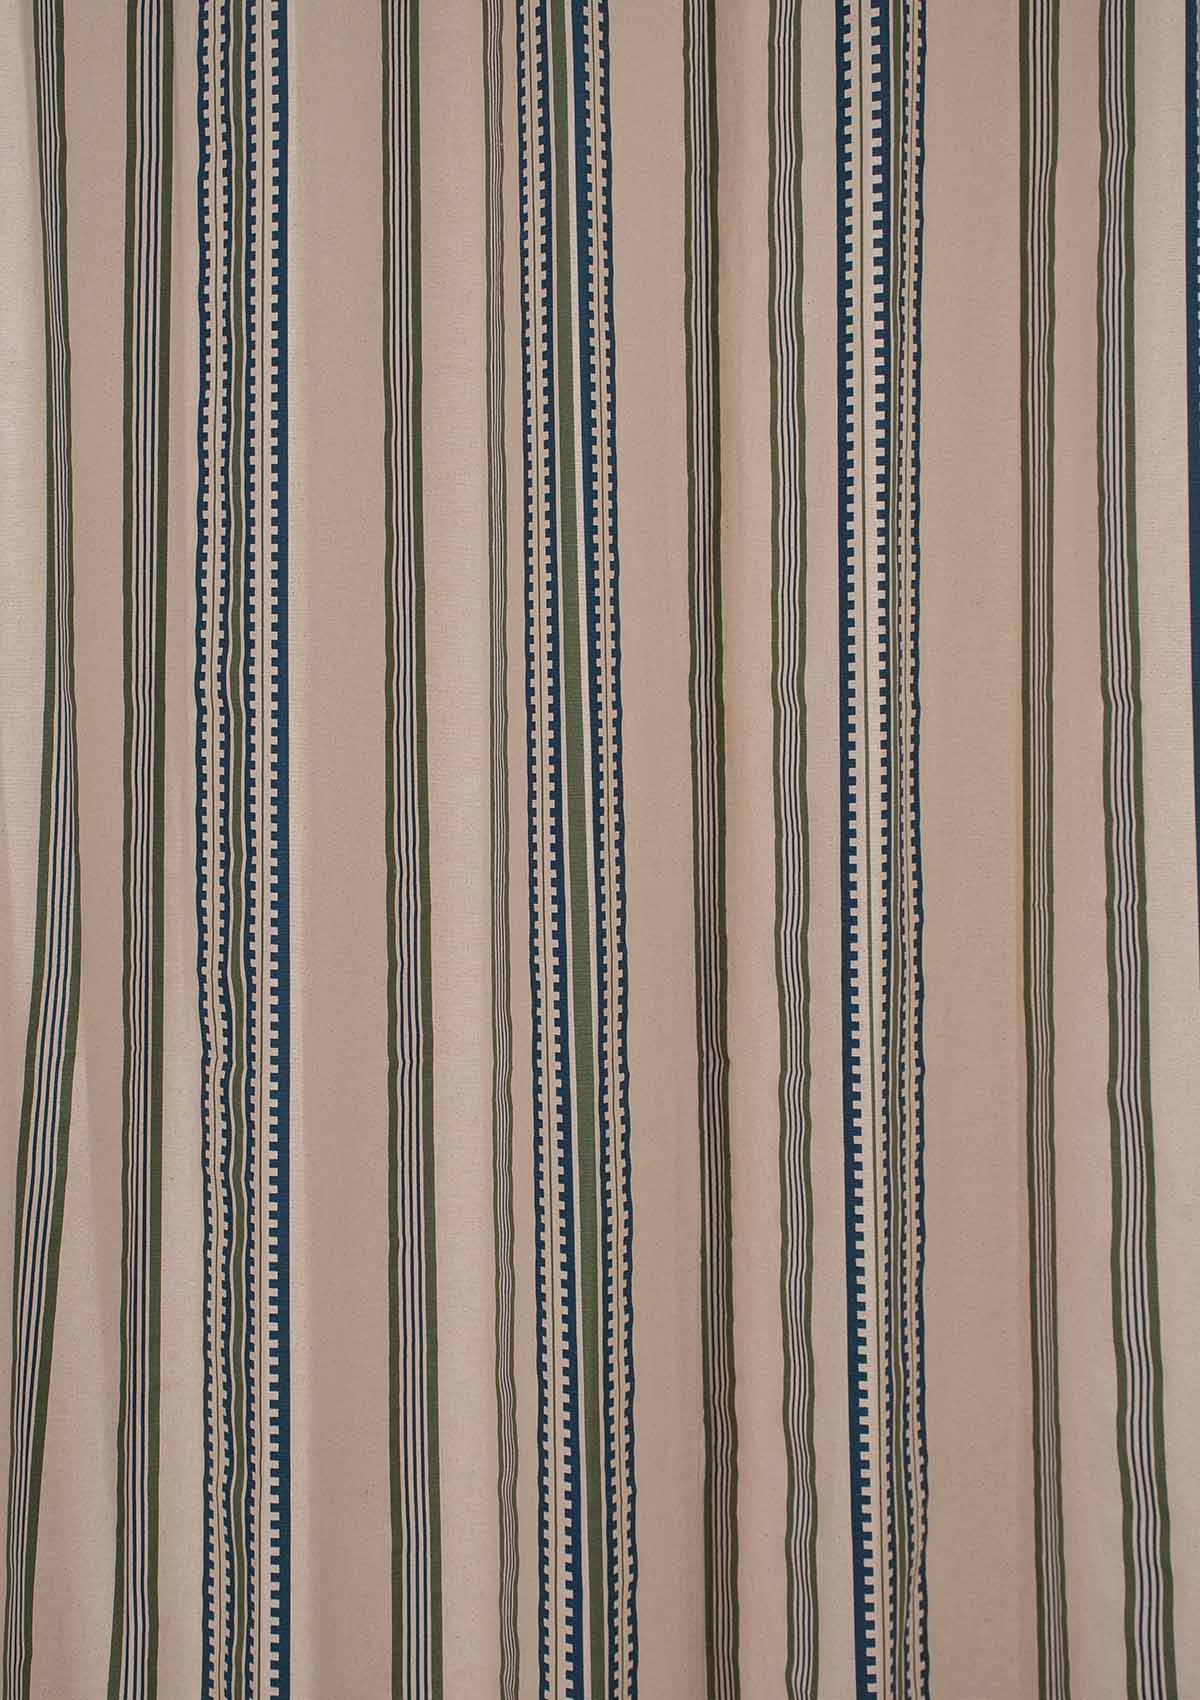 Roman Stripes 100% Customizable Cotton geometric curtain for bed room - Room darkening - Pepper Green and Night Blue